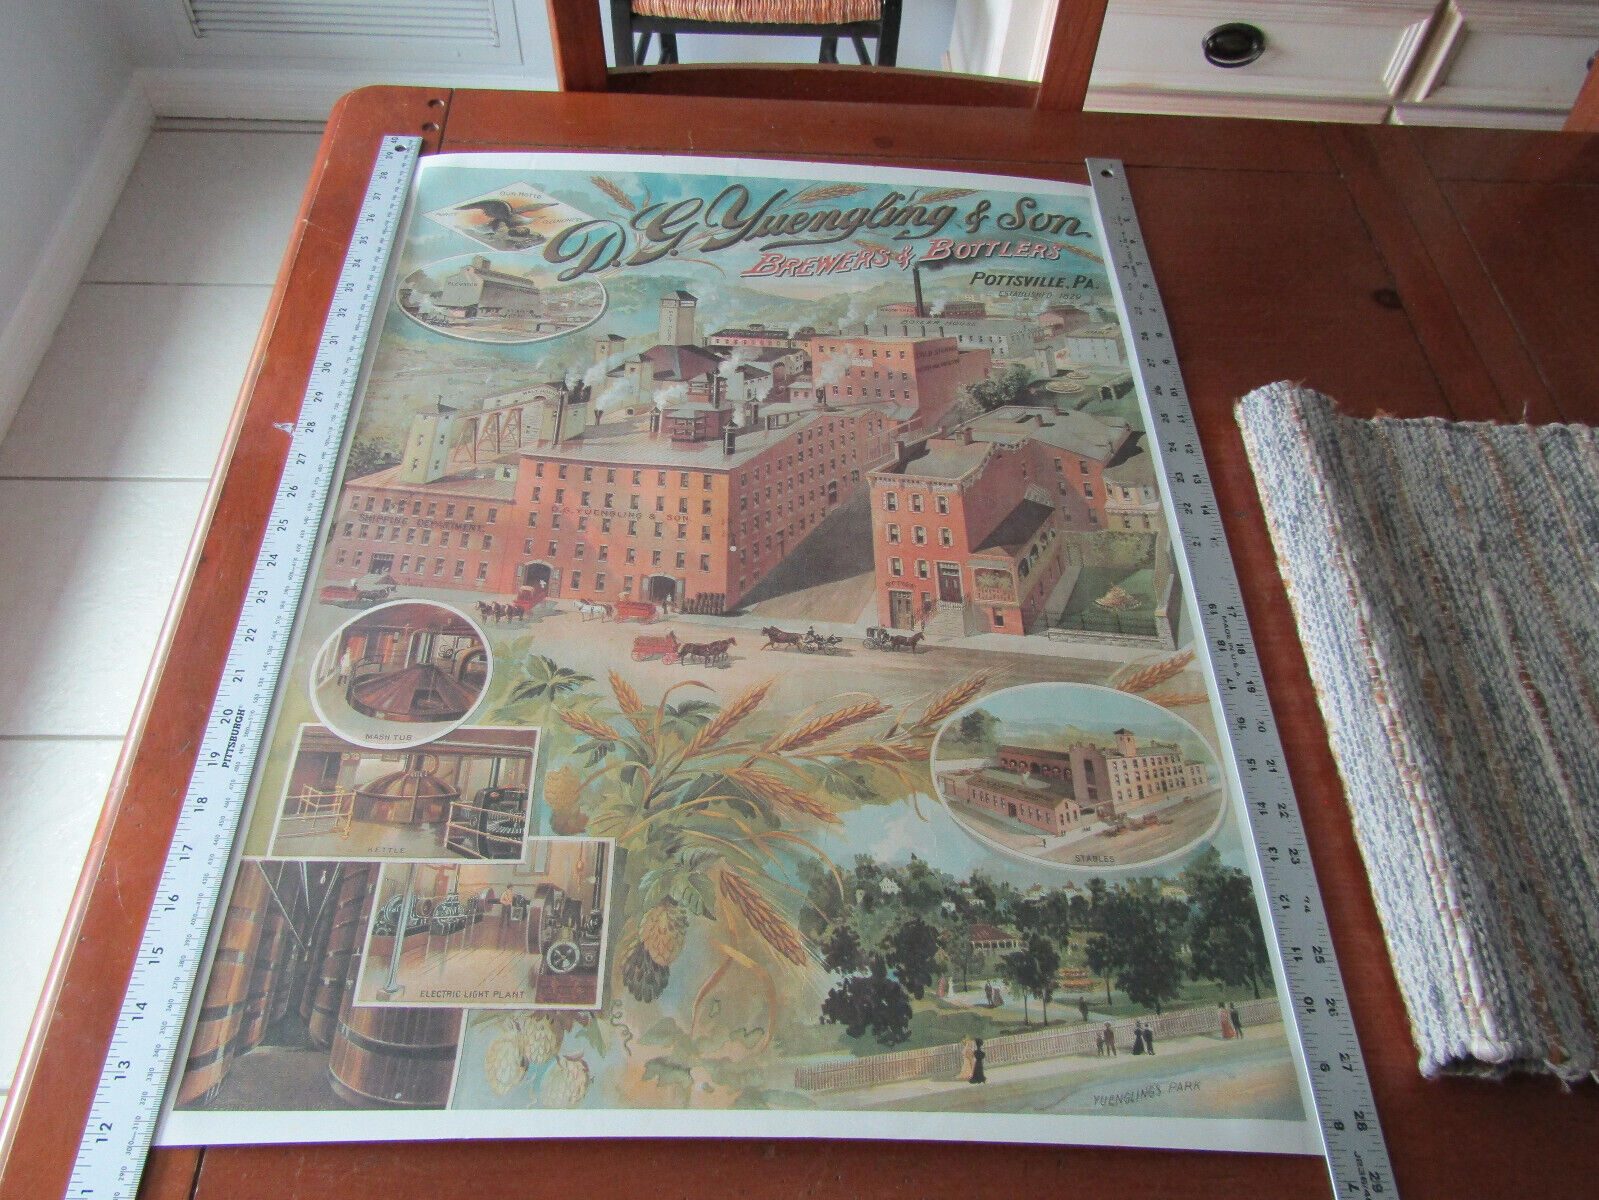 Rare Yuengling Beer Brewery Poster    27 1/2\'\' x 21\'\'  Pottsville PA